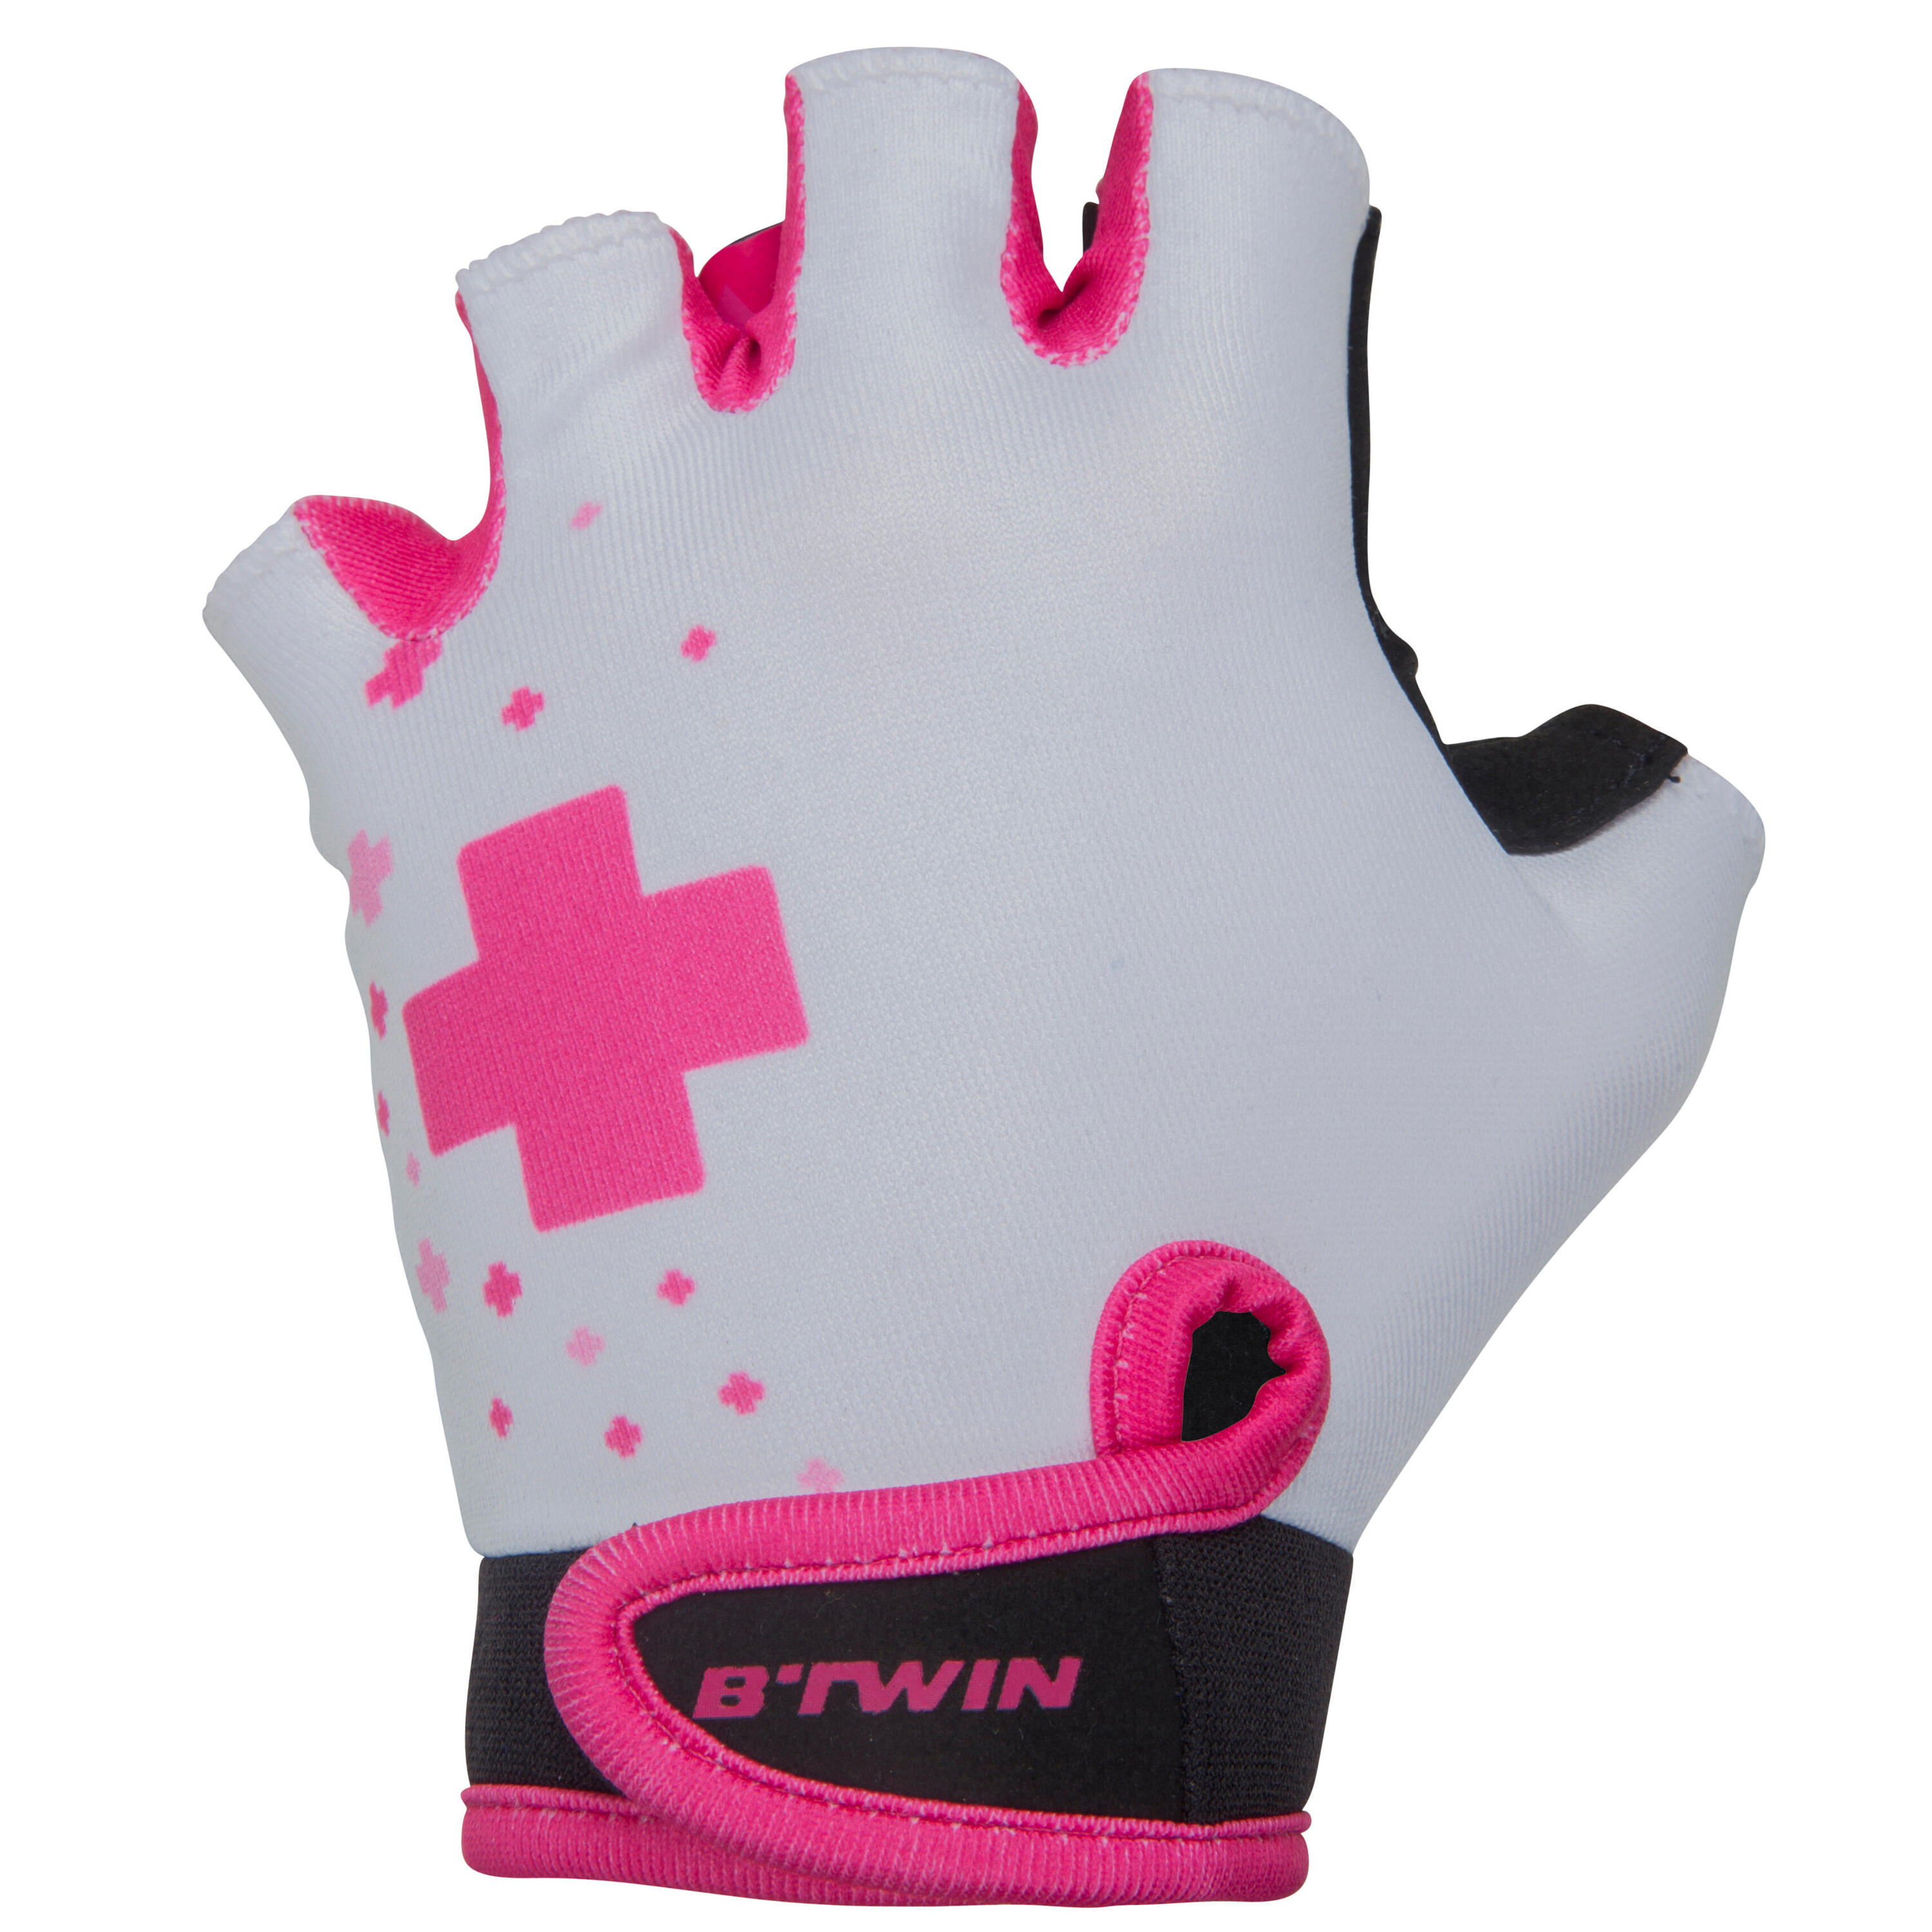 BTWIN Kids' Fingerless Cycling Gloves - Doctogirl